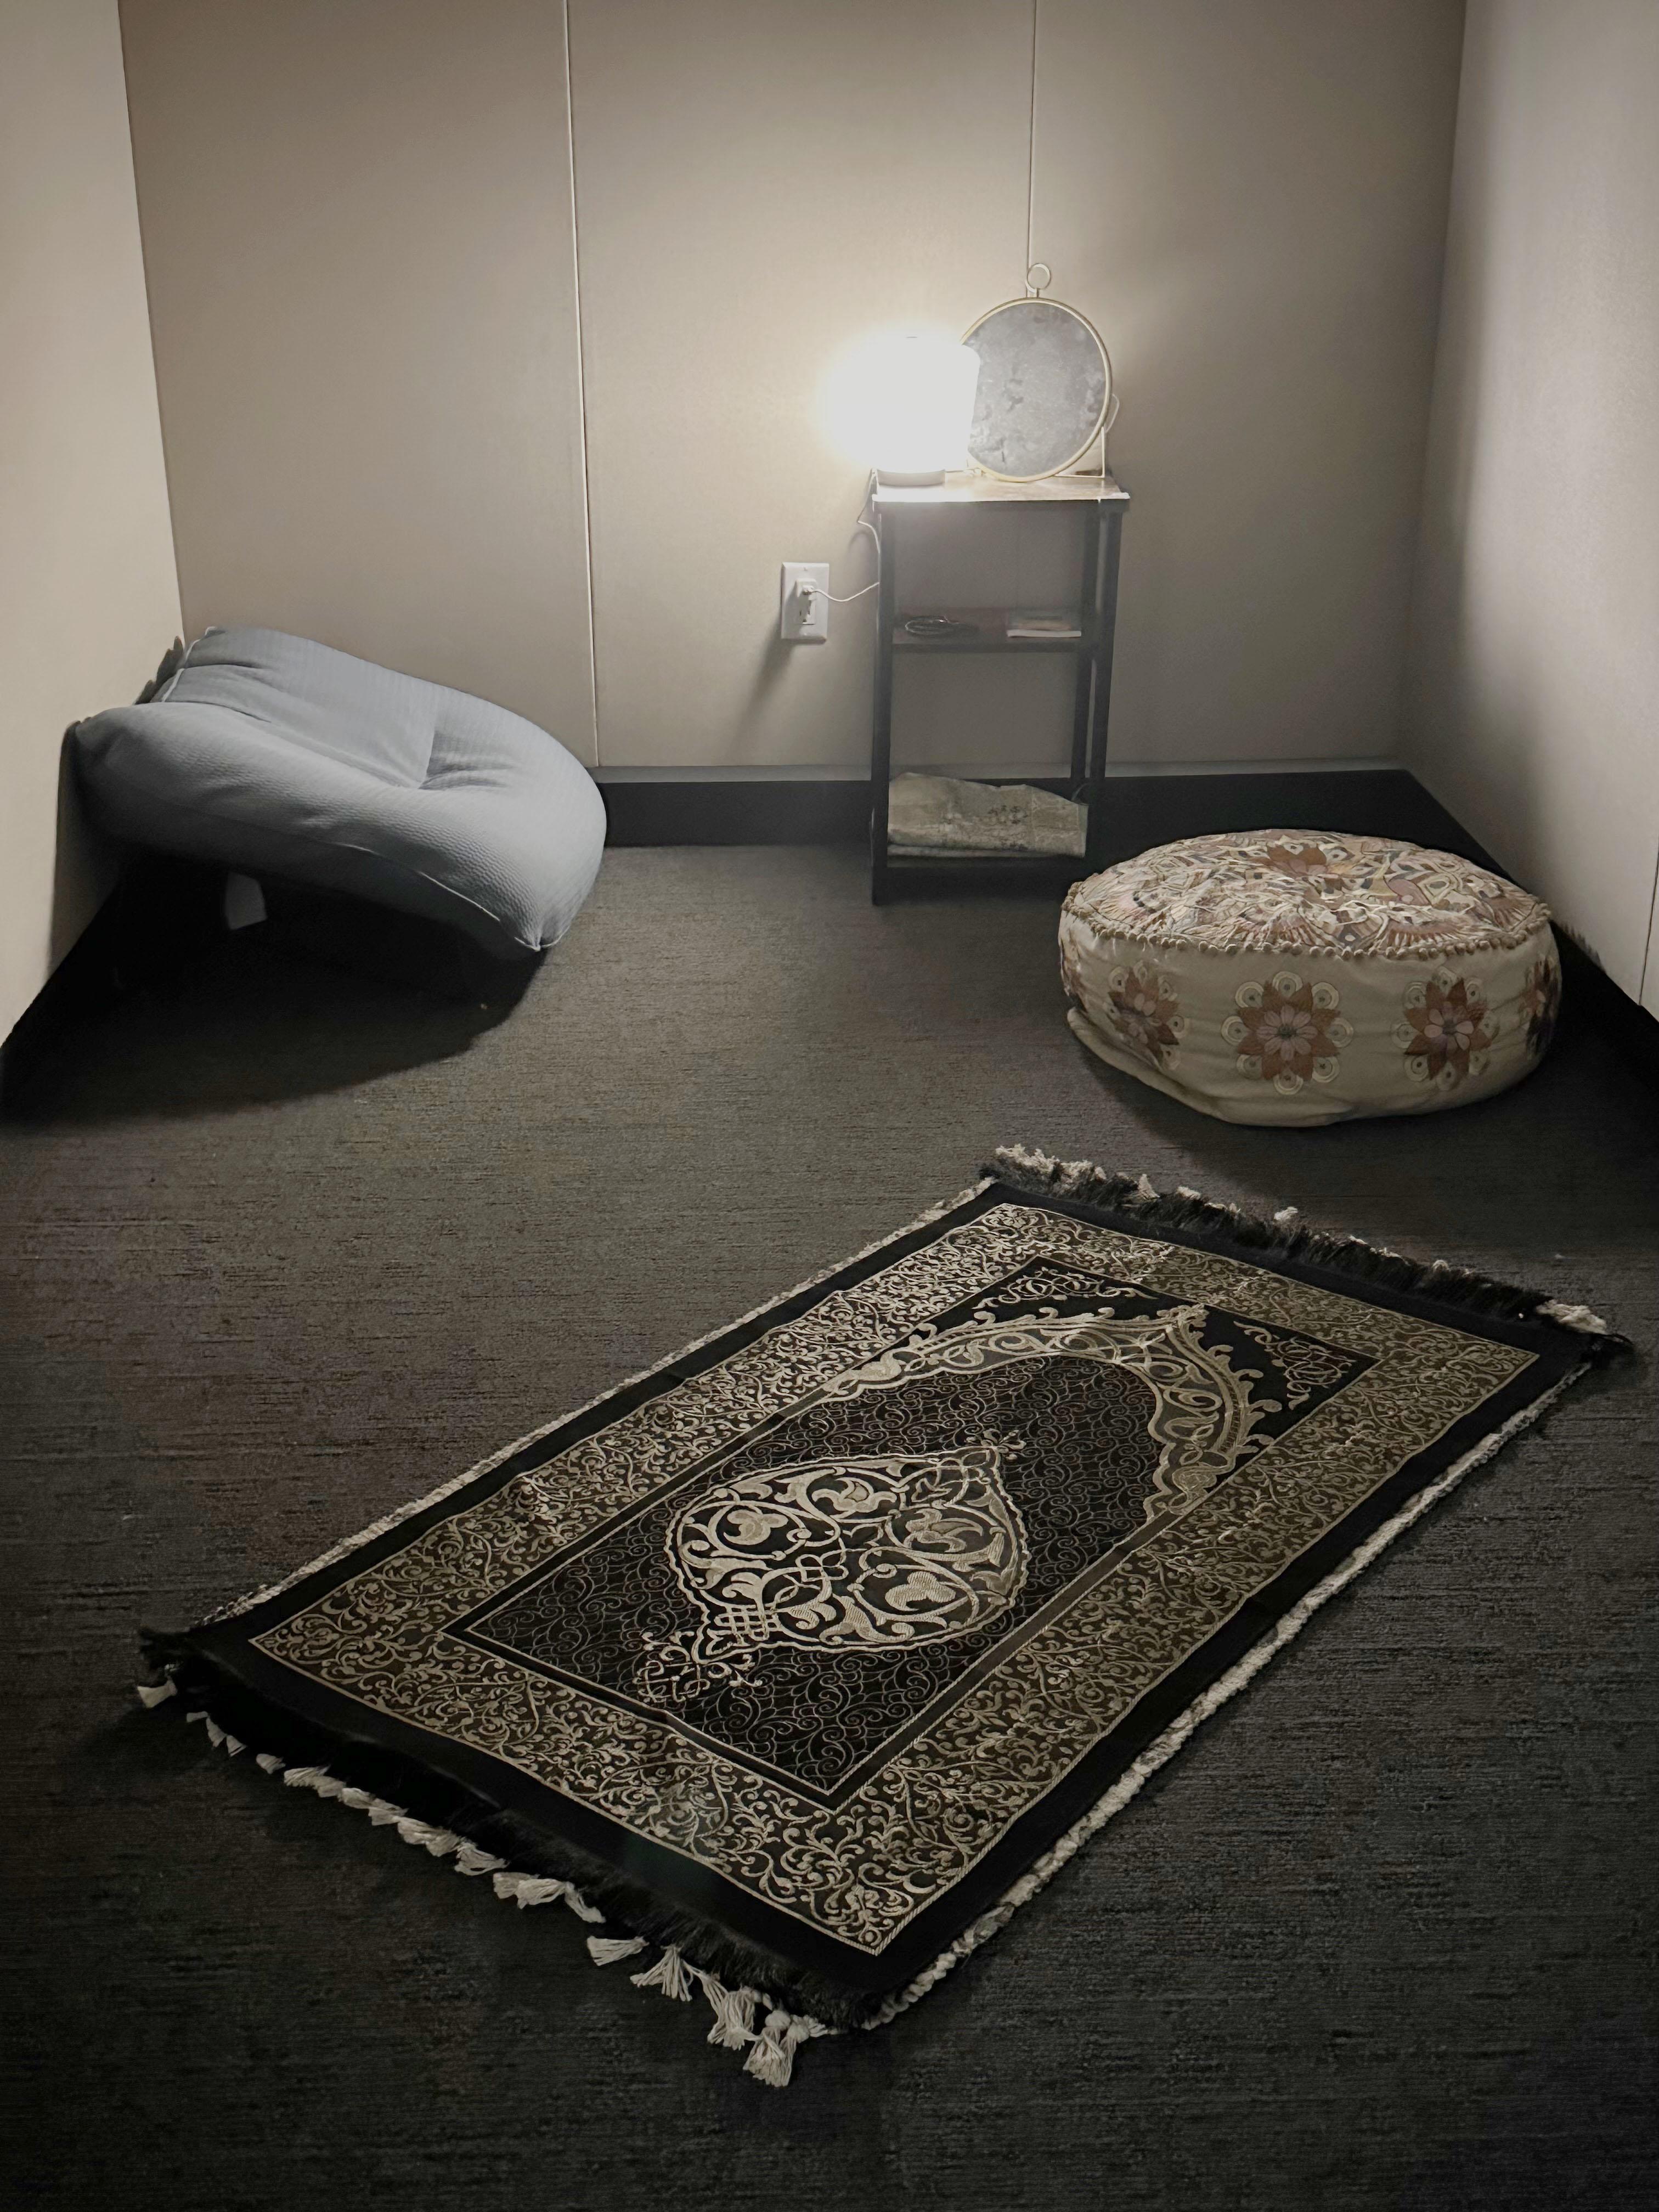 Cushions along with a prayer rug in a room that also has a light sitting on a small table.